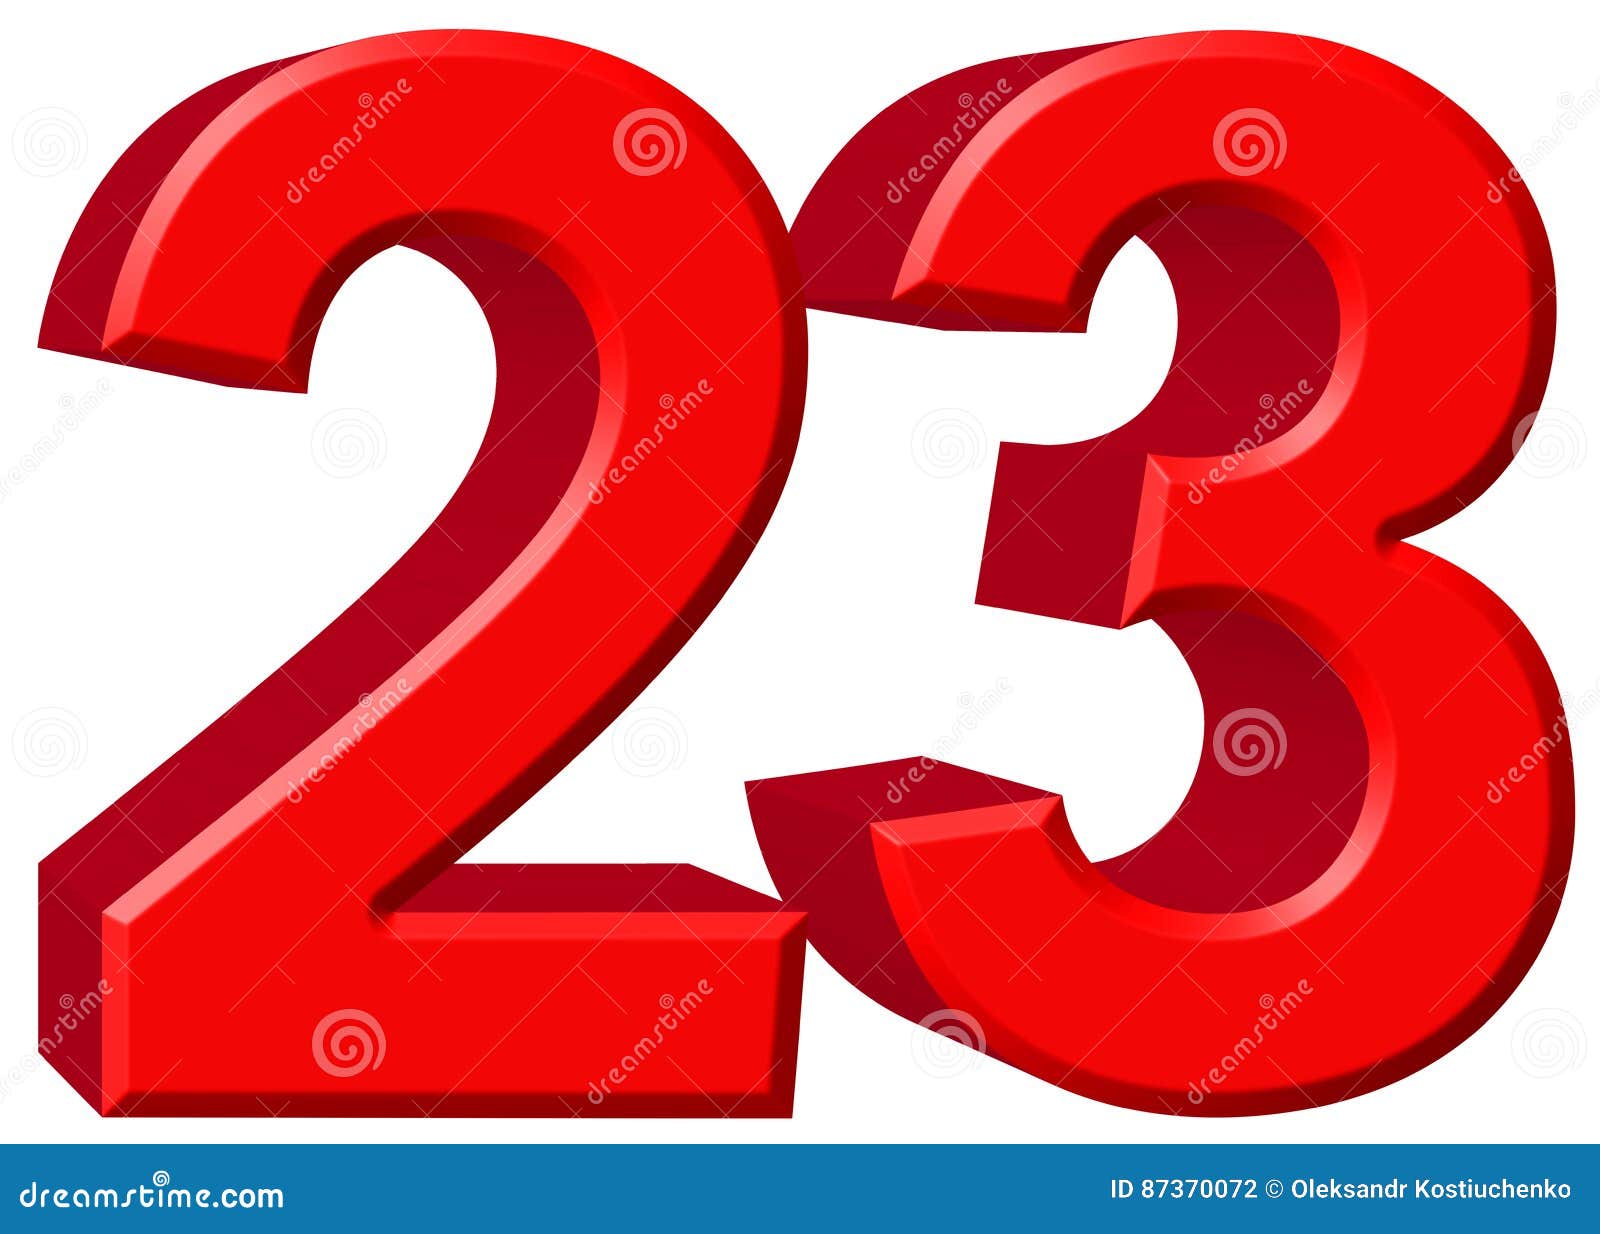 number 23 clipart